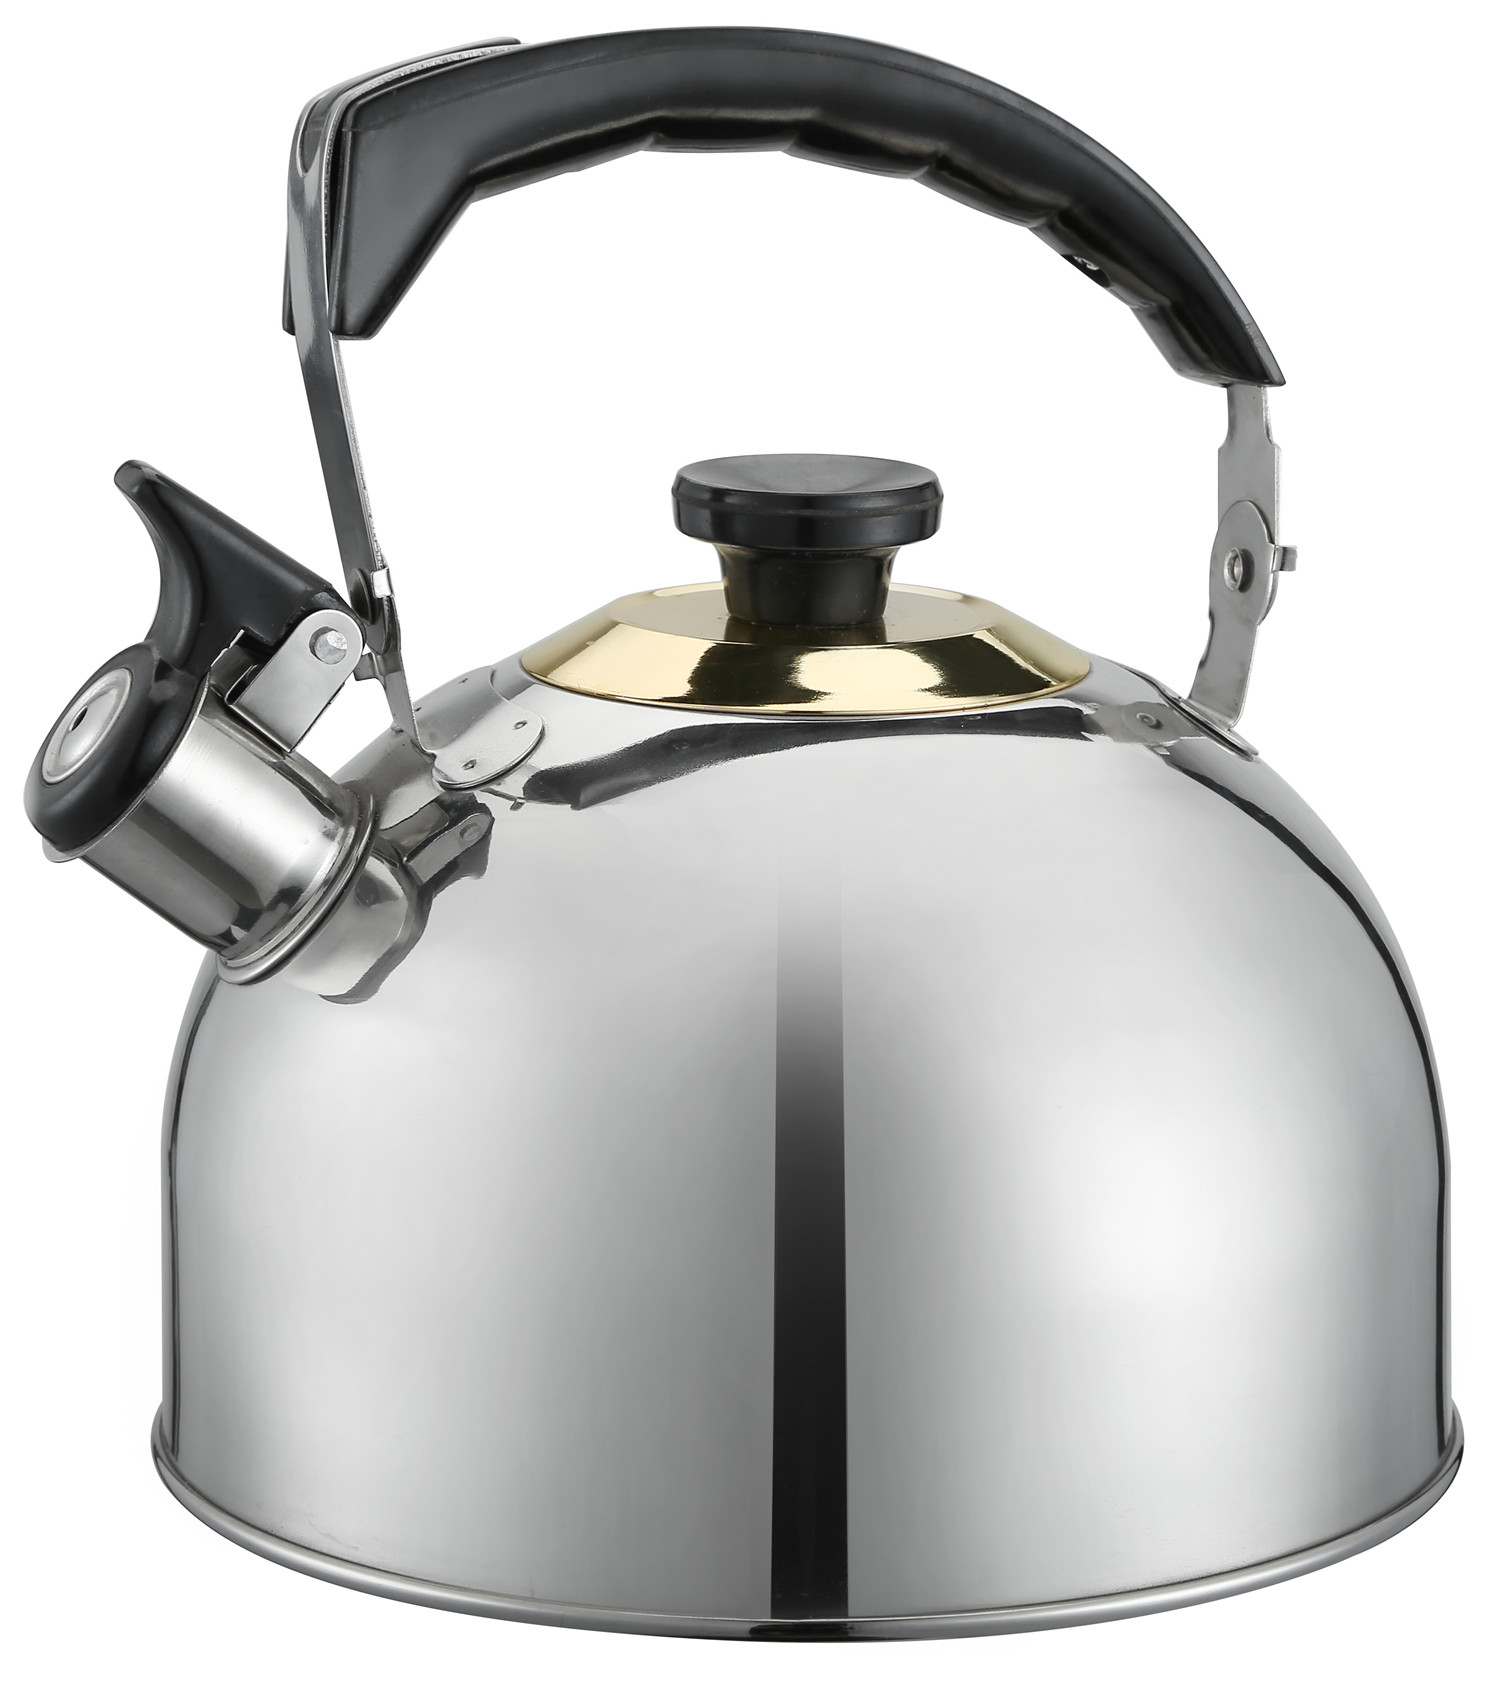 Homeware 3 litre kettle durable colorful kettle teapot Induction Gas Stovetop for stove